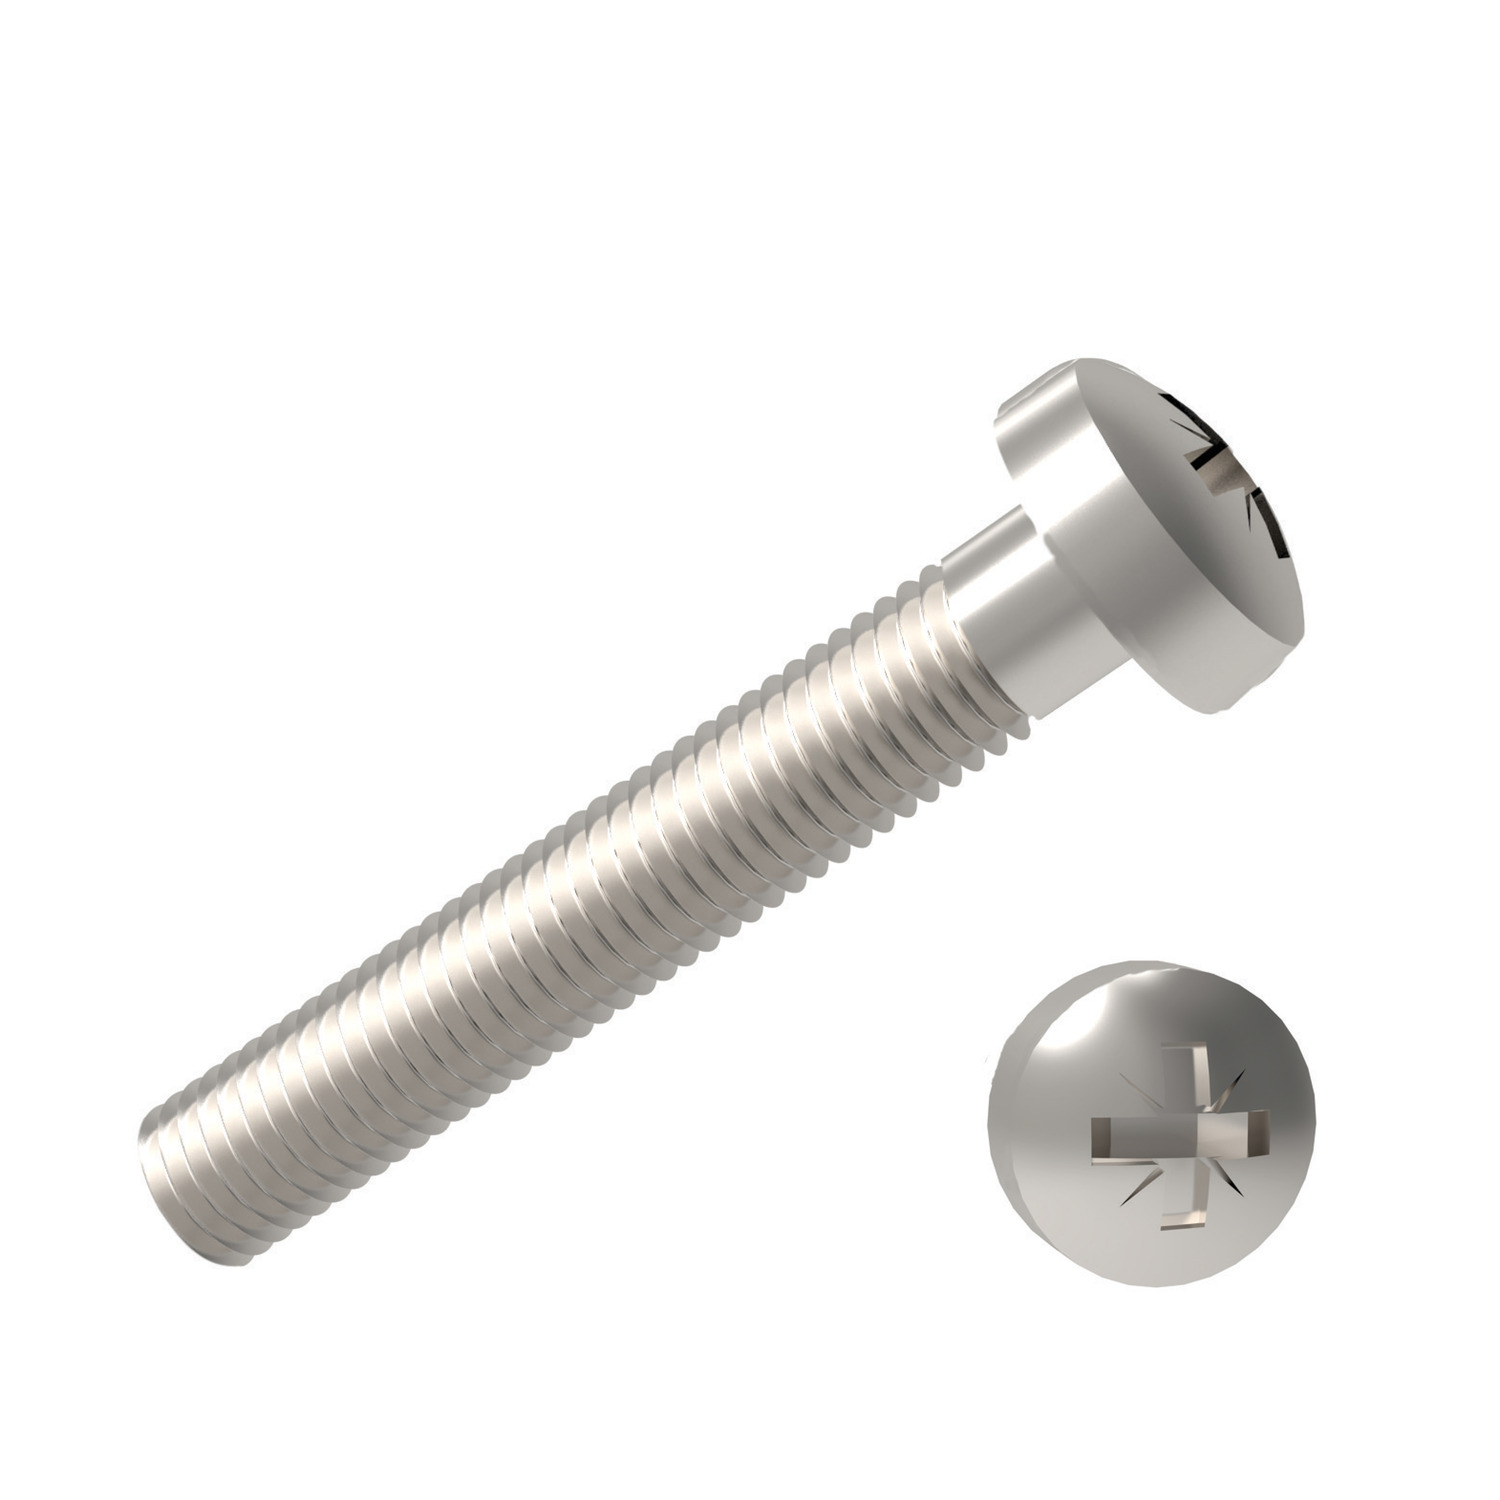 Pozi Pan Head Screws A2 Stainless Steel. To DIN 7985 Z, ISO 7045. Threaded within 2,5 x pitch of head